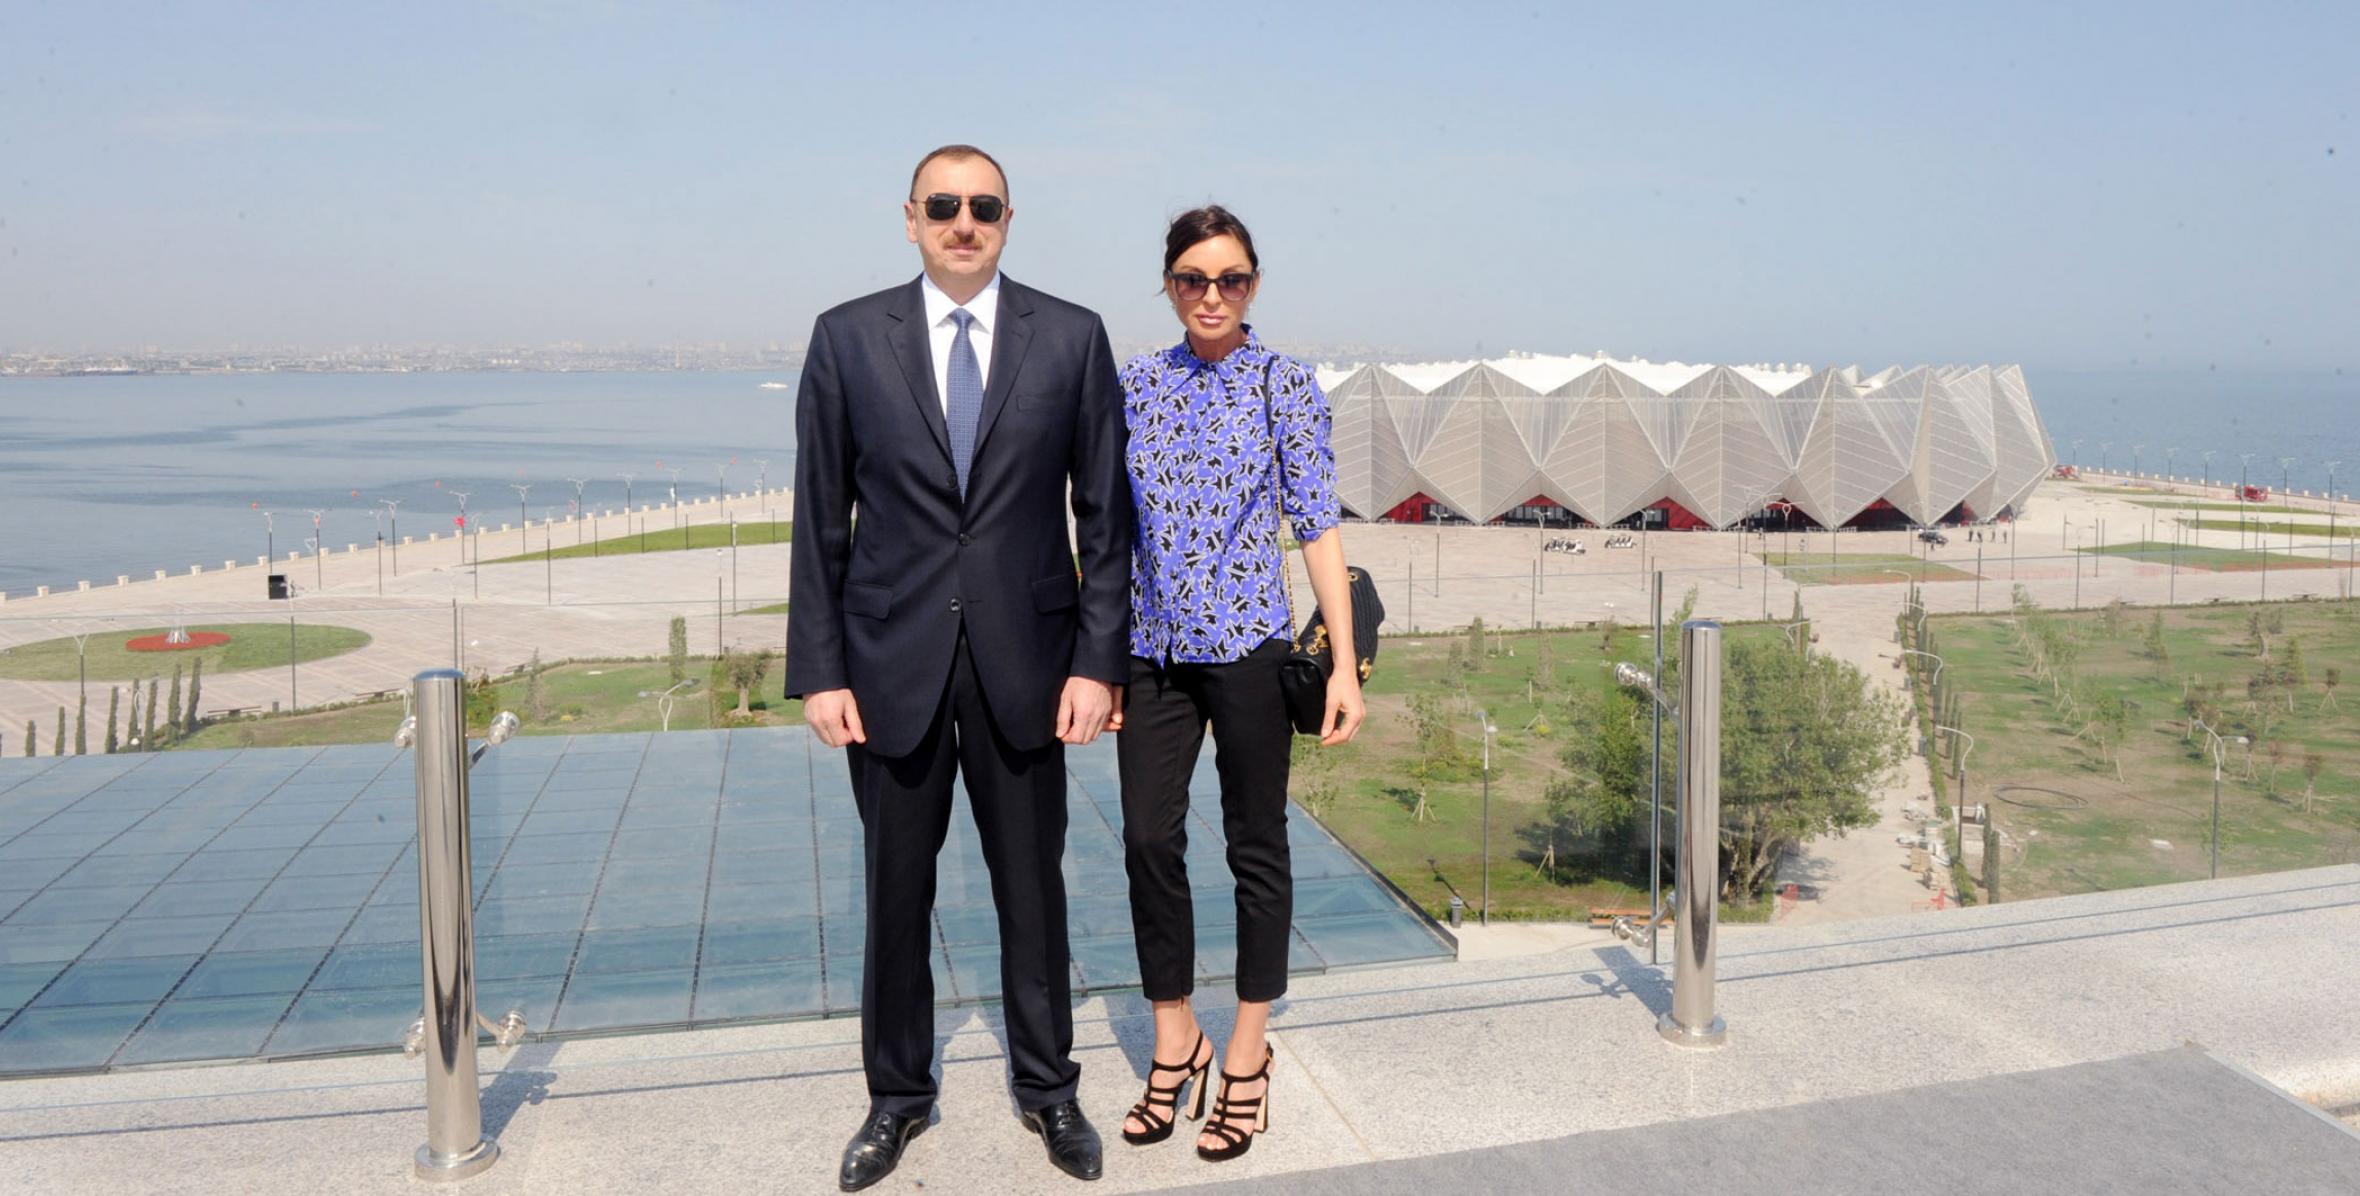 Ilham Aliyev attended the opening of the Baku Crystal Hall, the venue of the Eurovision-2012 Song Contest